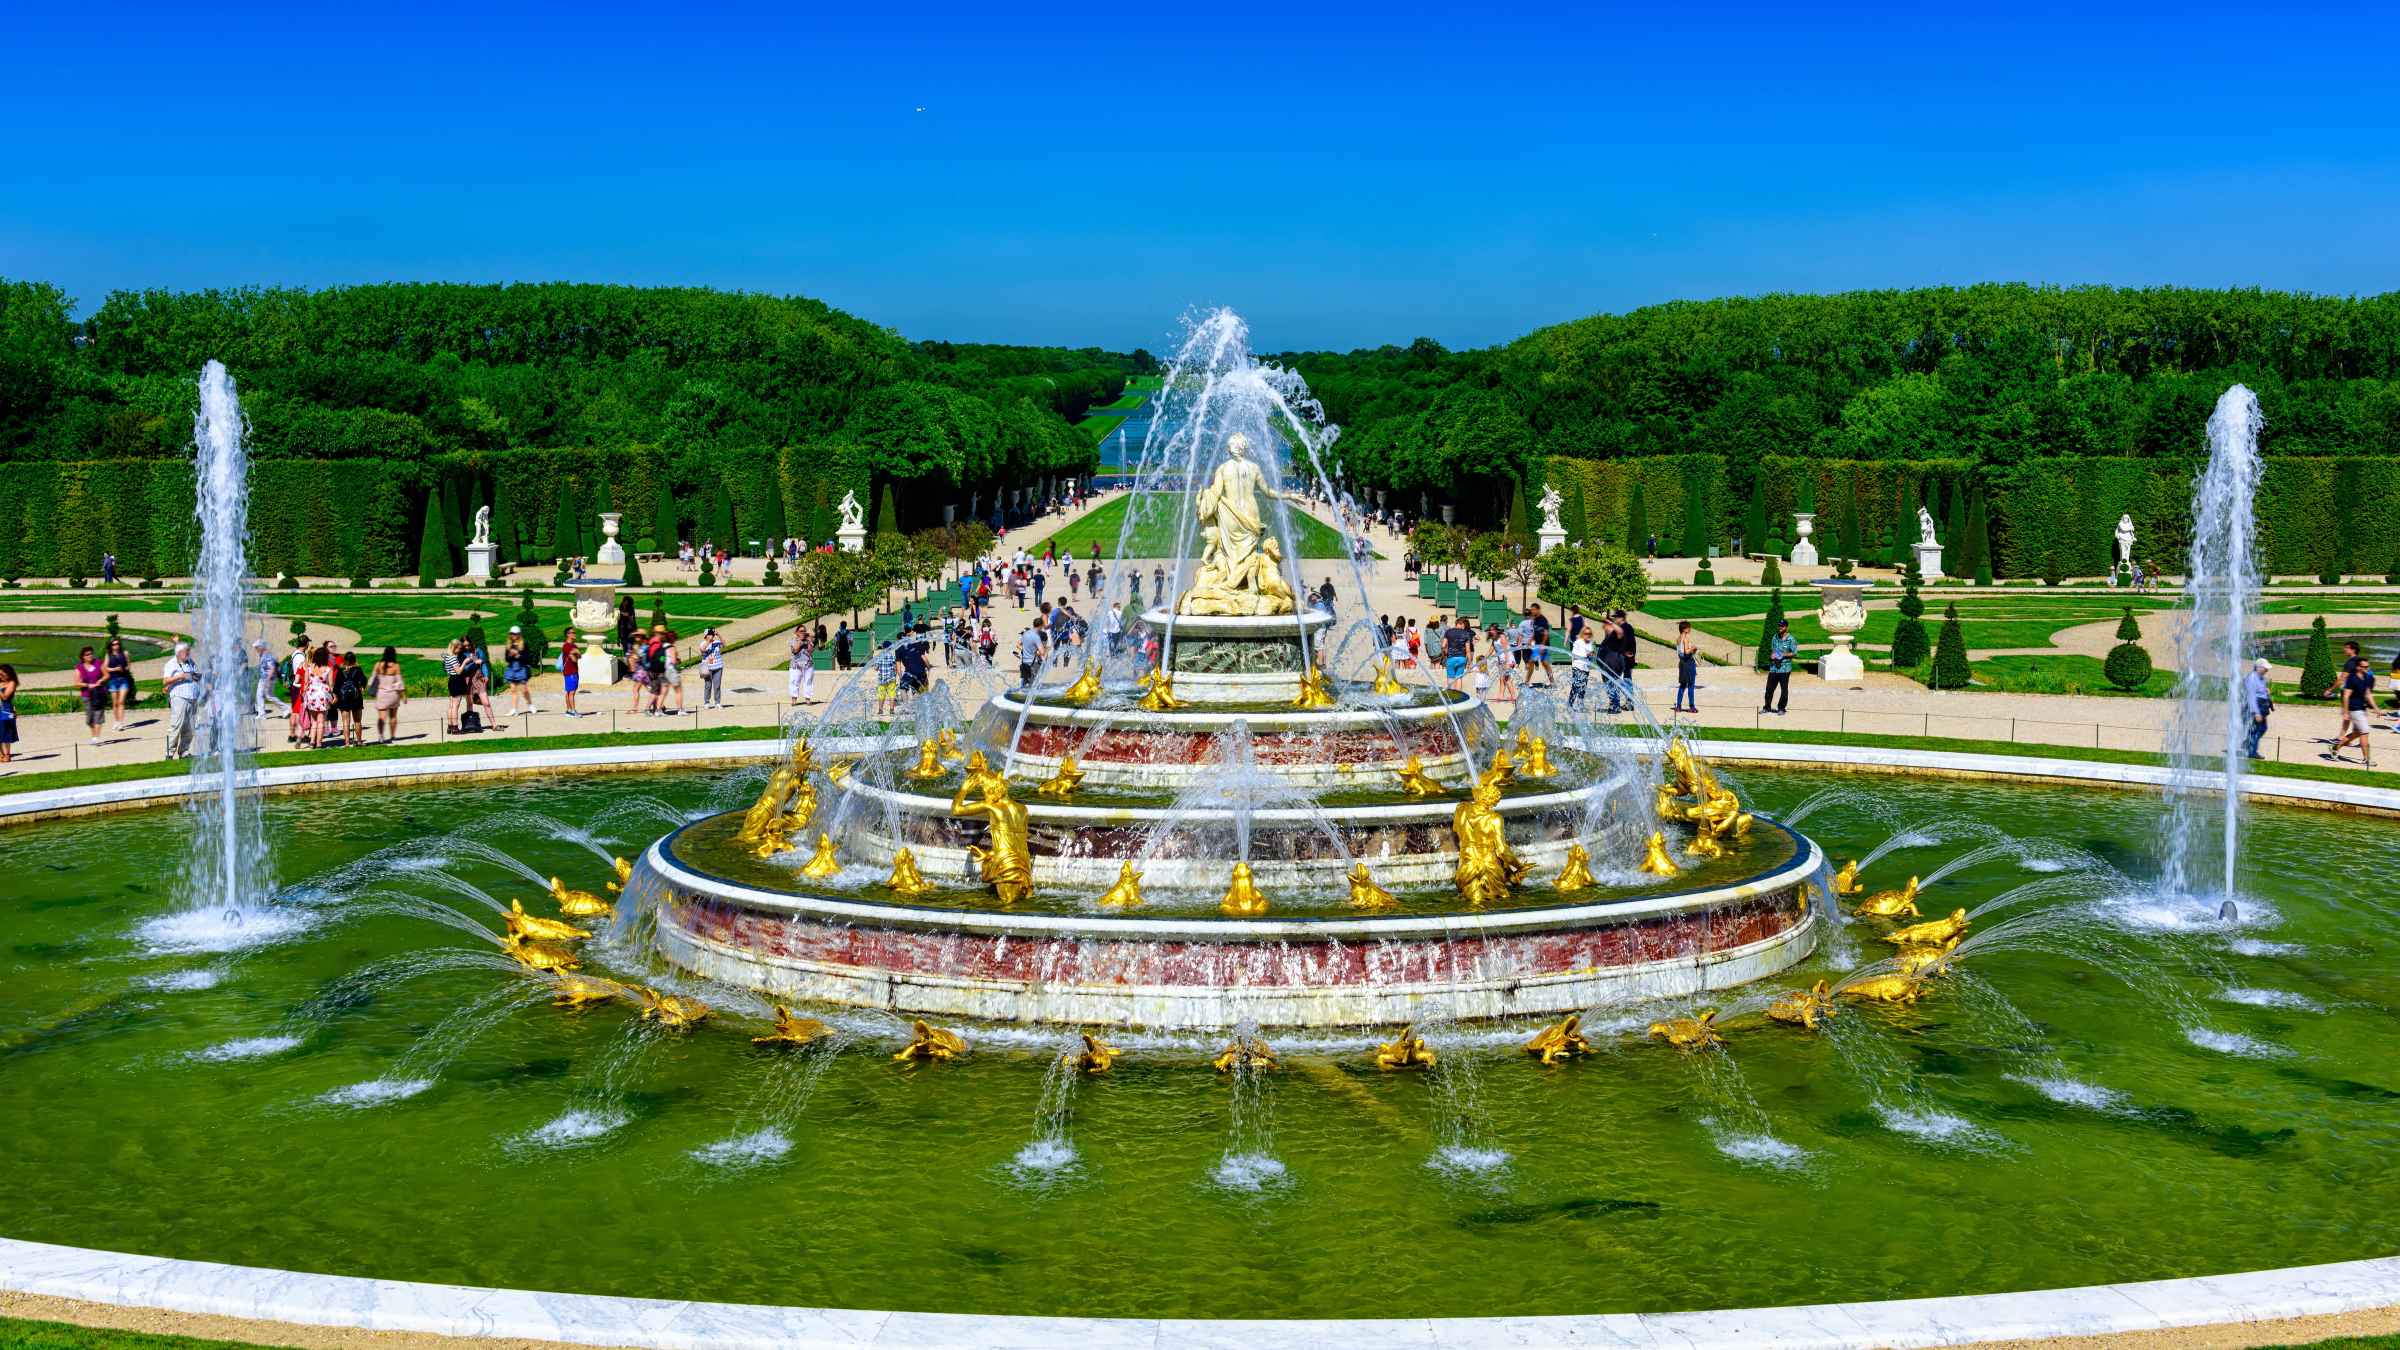 The BEST Palace of Versailles Fountains Romantic 2022 - FREE Cancellation | GetYourGuide